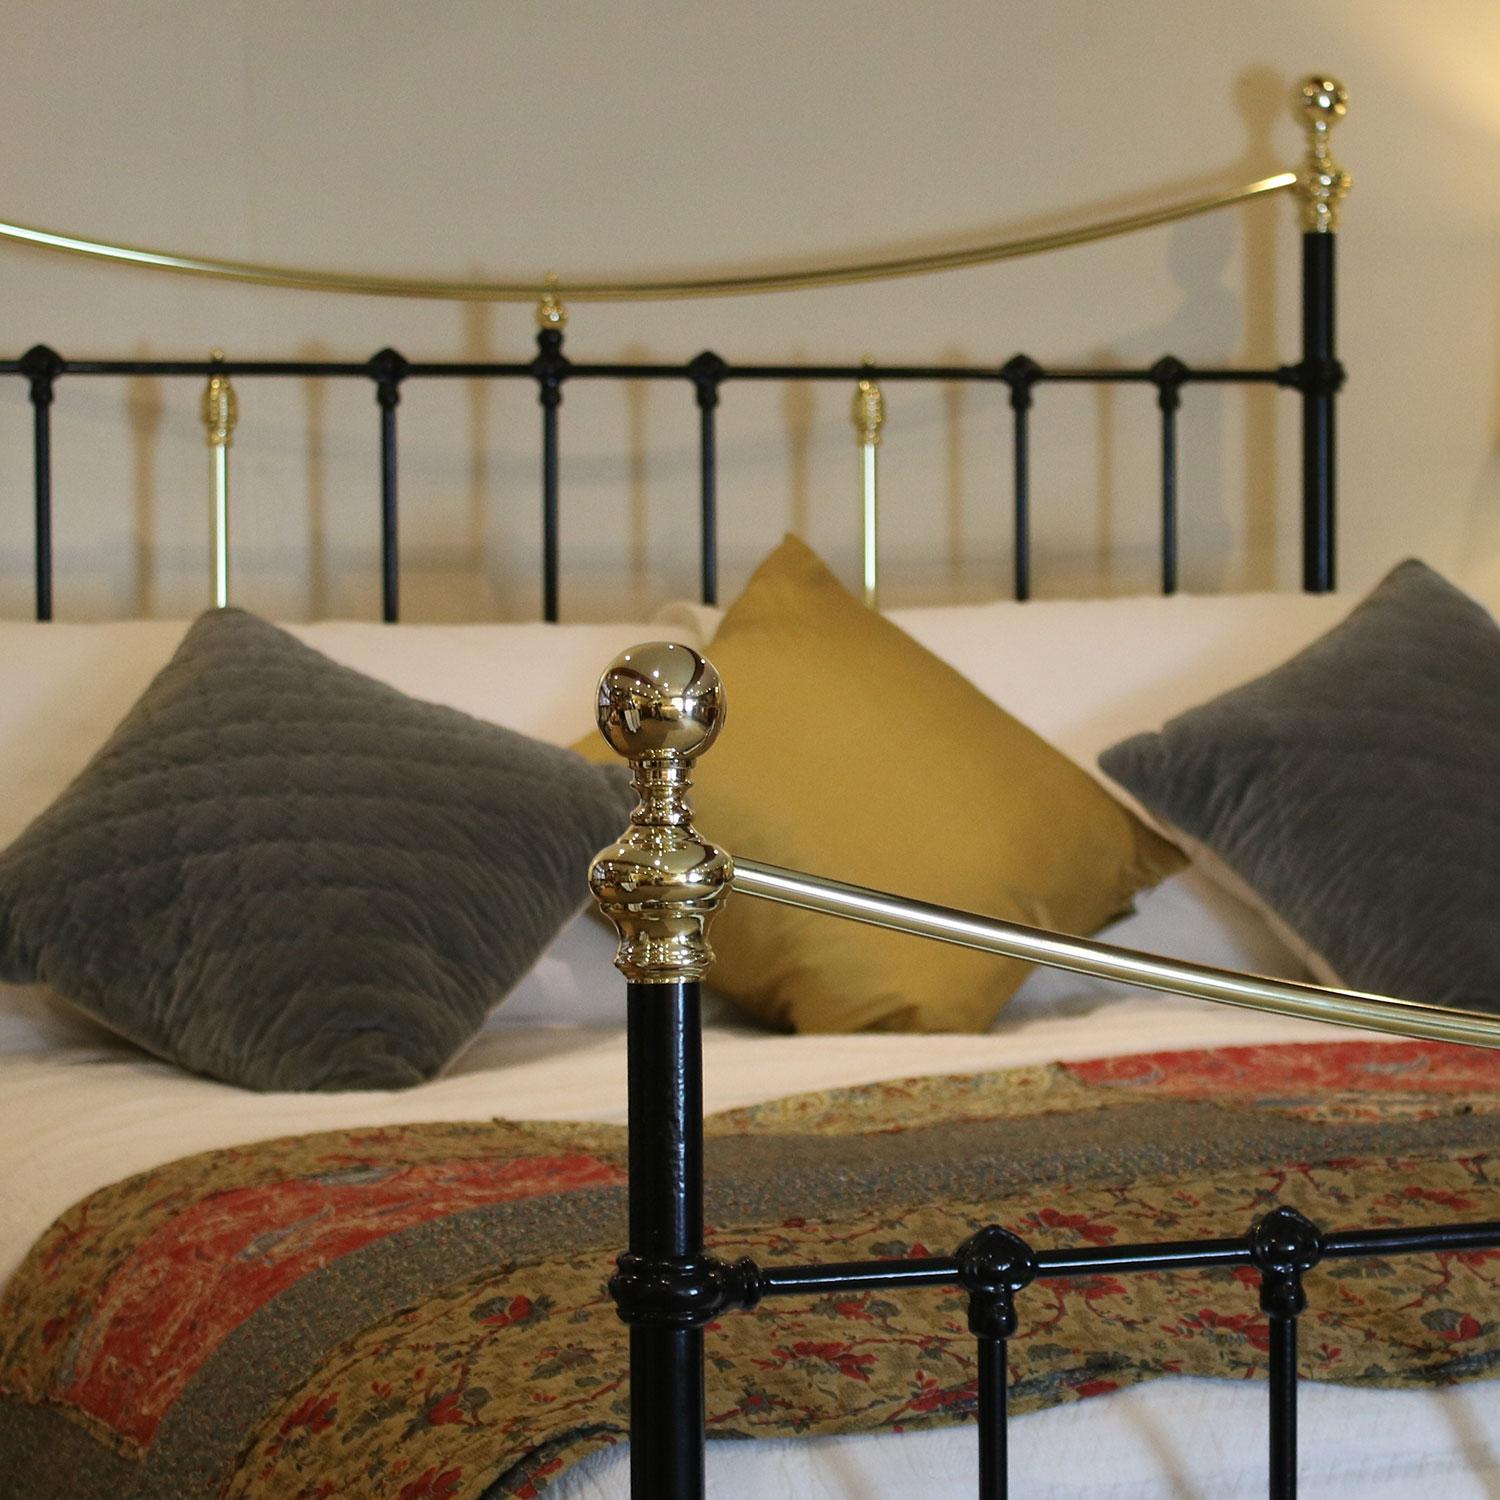 Cast Victorian Brass and Iron Bed in Black, MK159